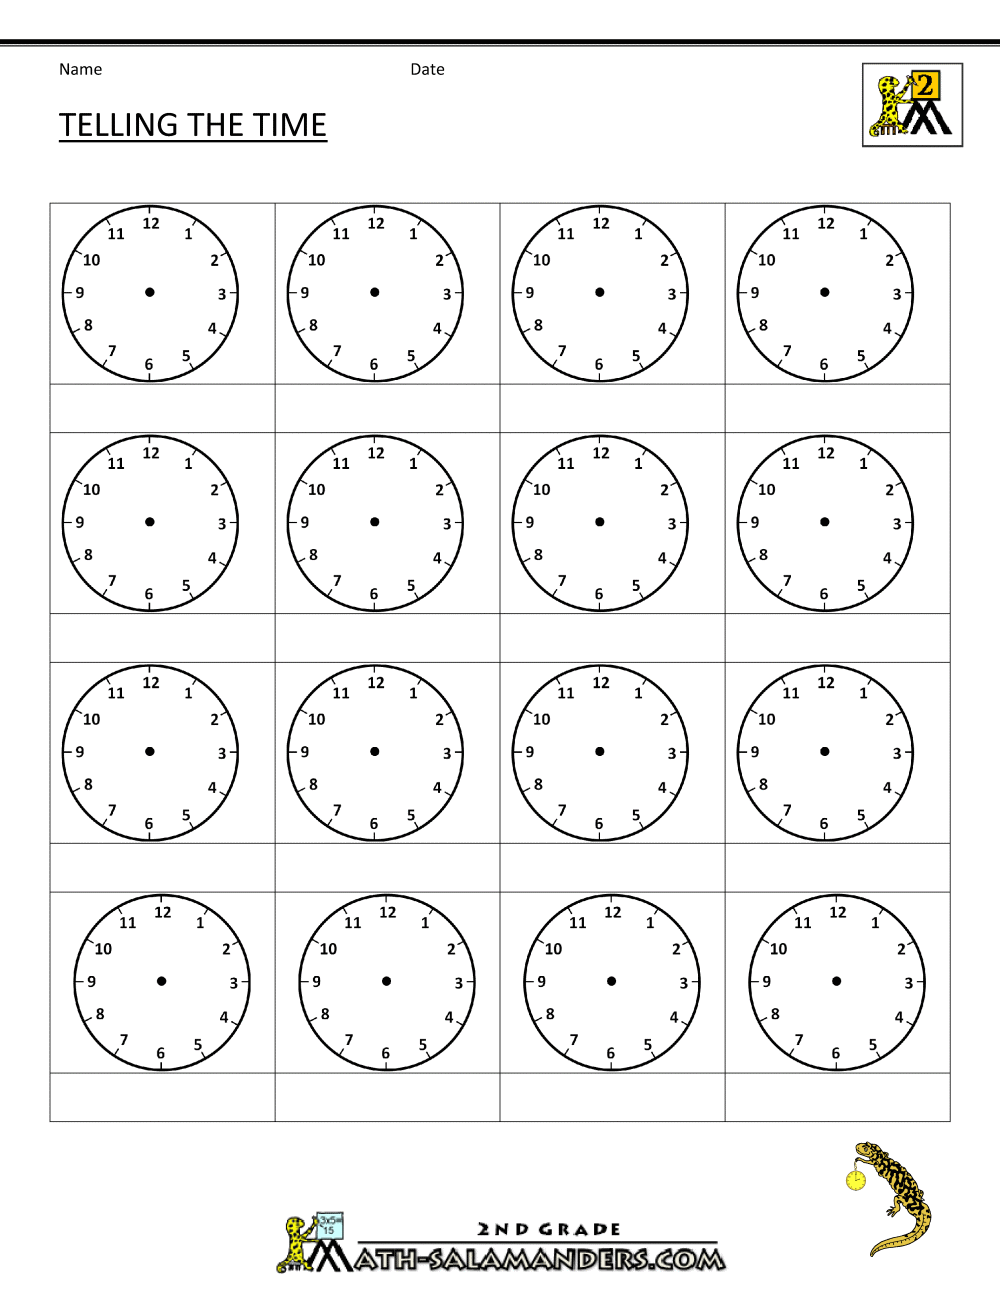 the-reading-time-on-12-hour-analog-clocks-in-5-minute-intervals-d